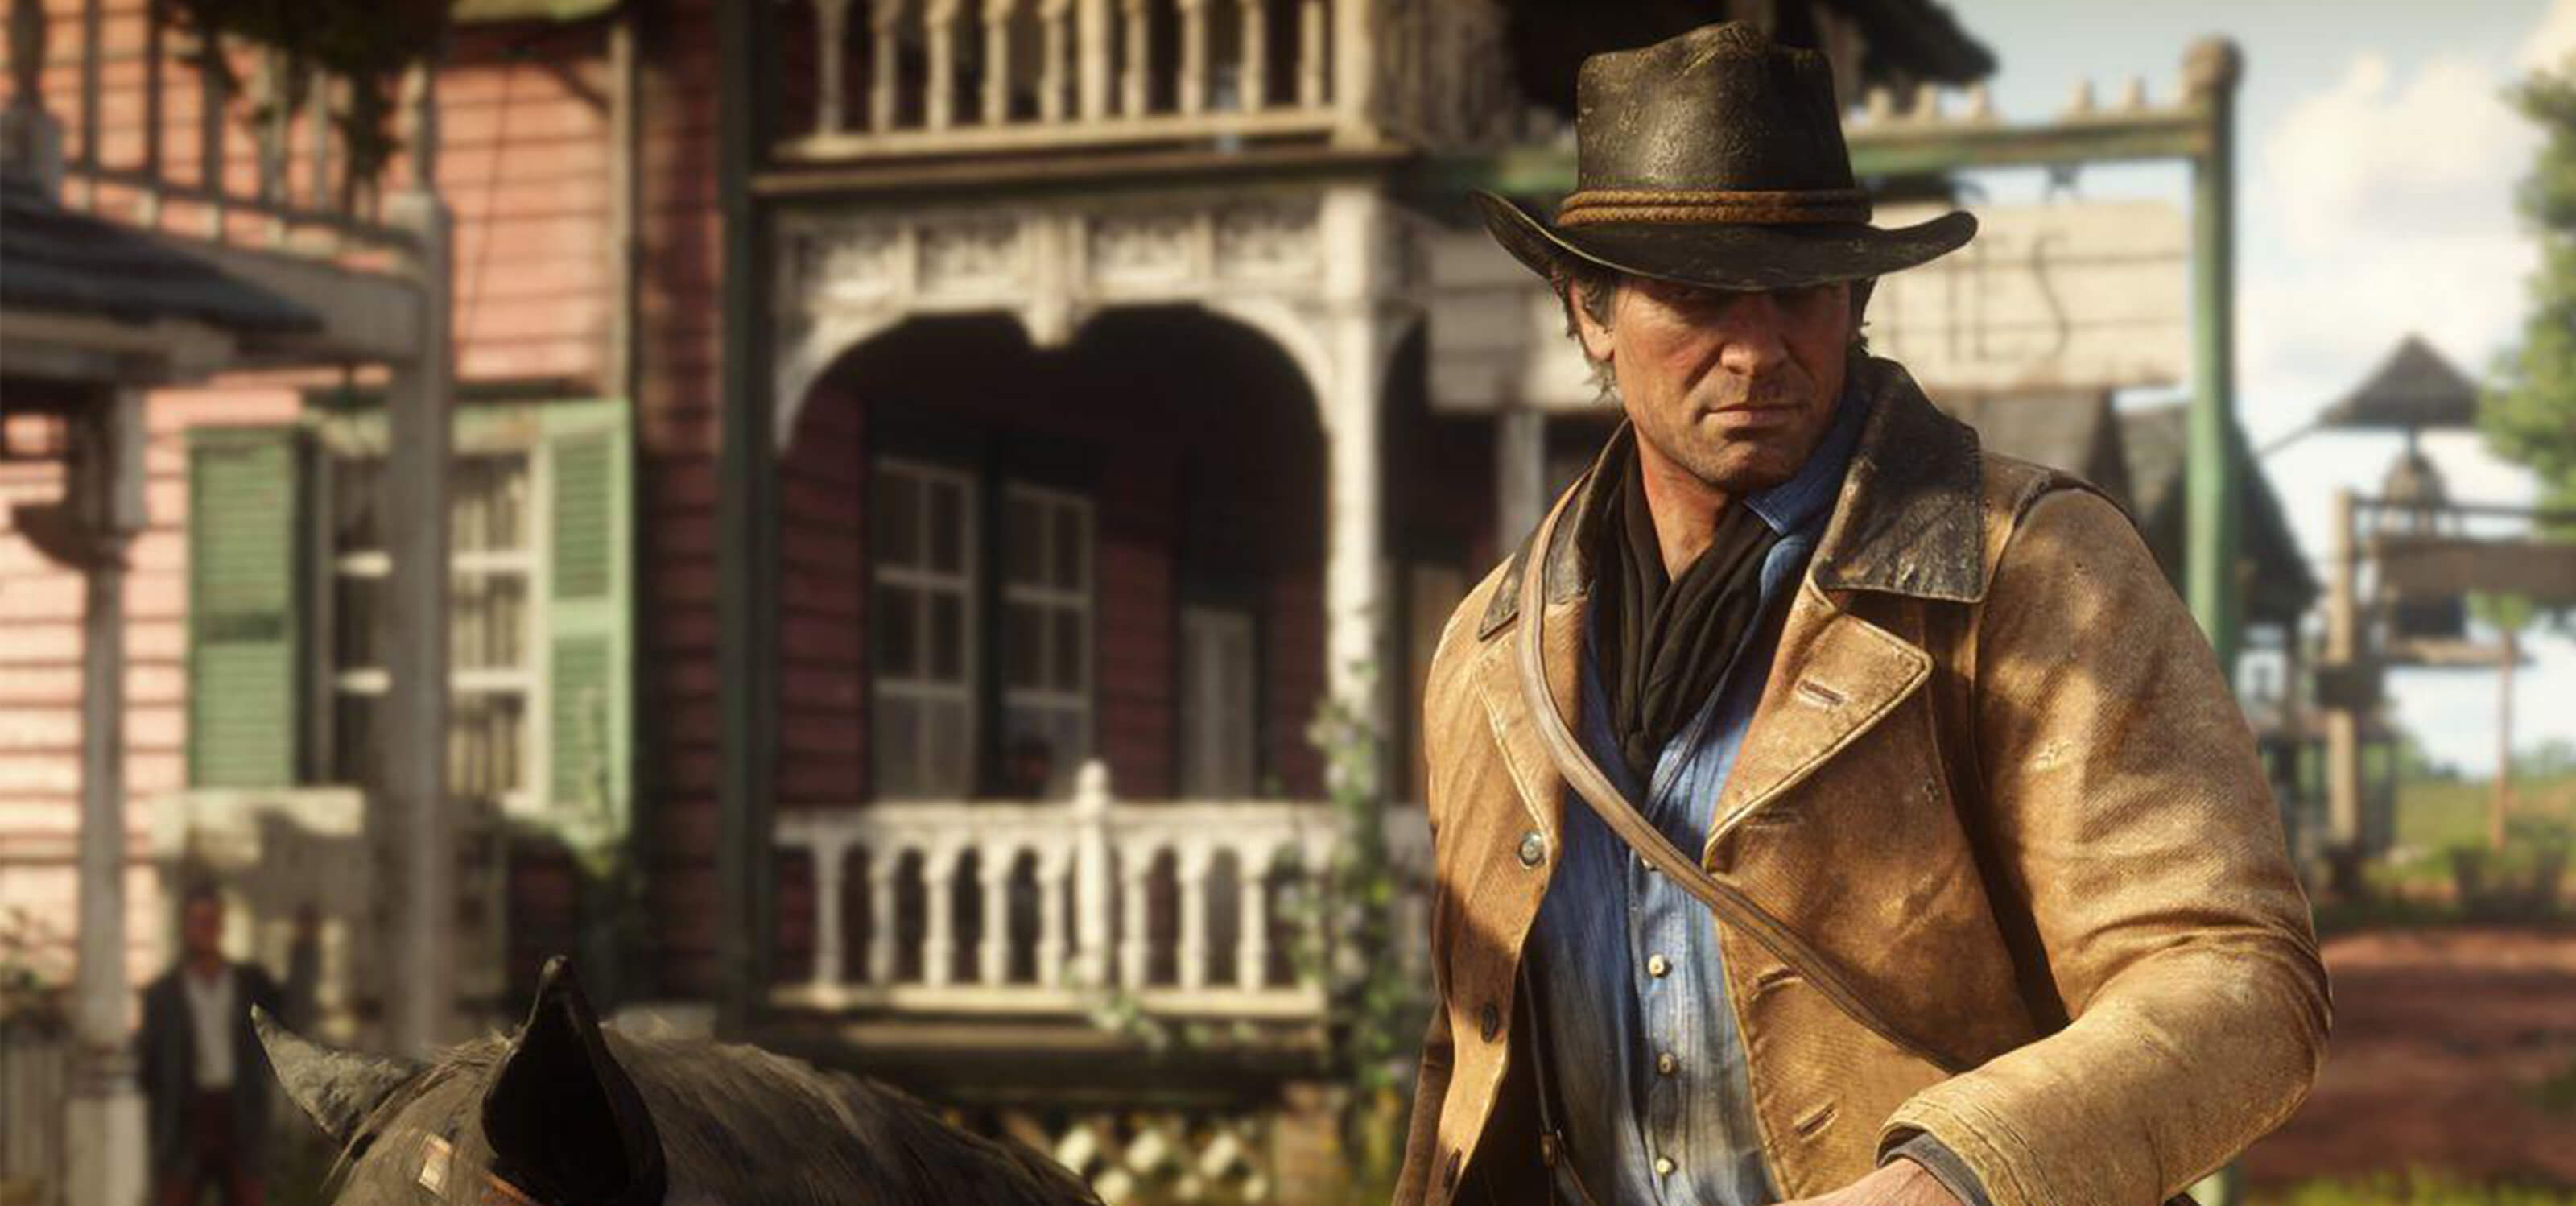 DigiPen Andy Kibler Puts the on the Cowboy in Red Dead Redemption 2 |